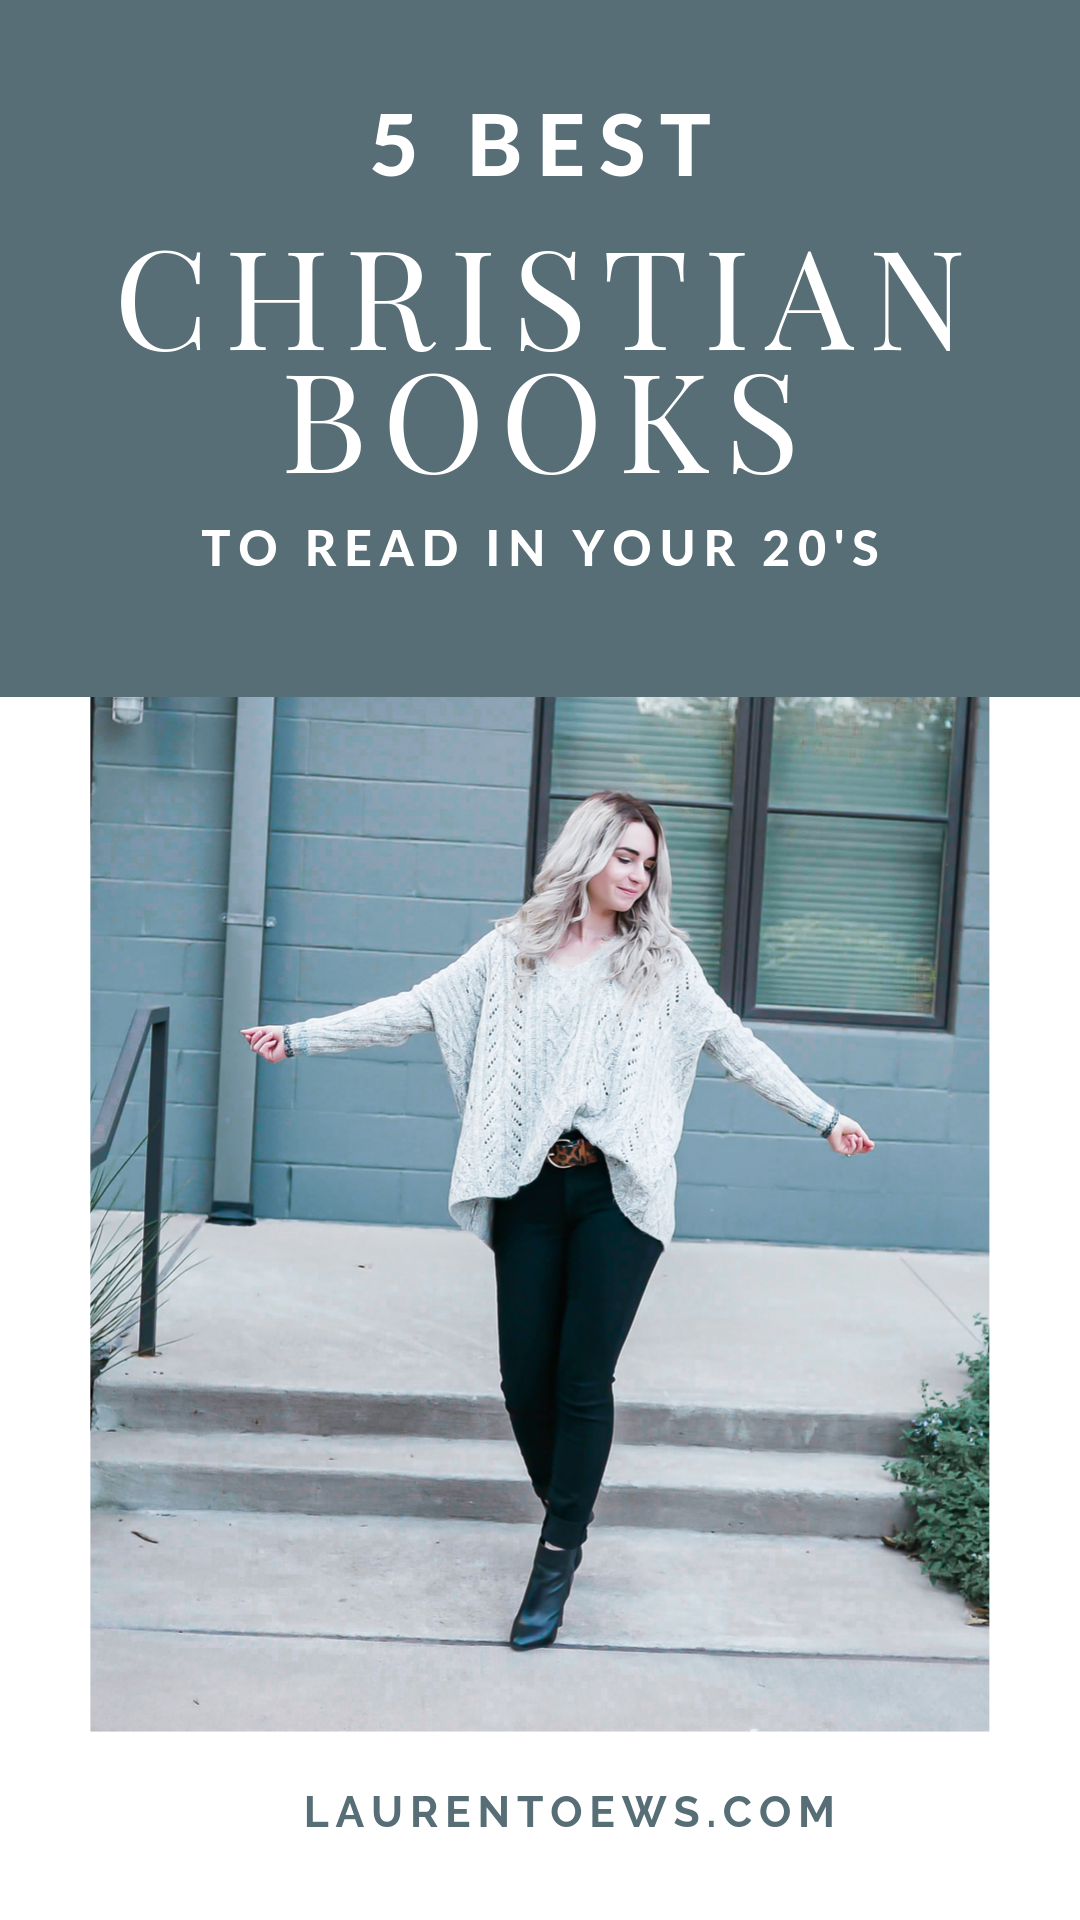 5 Best Christian Books to Read In Your 20's — Lauren Toews